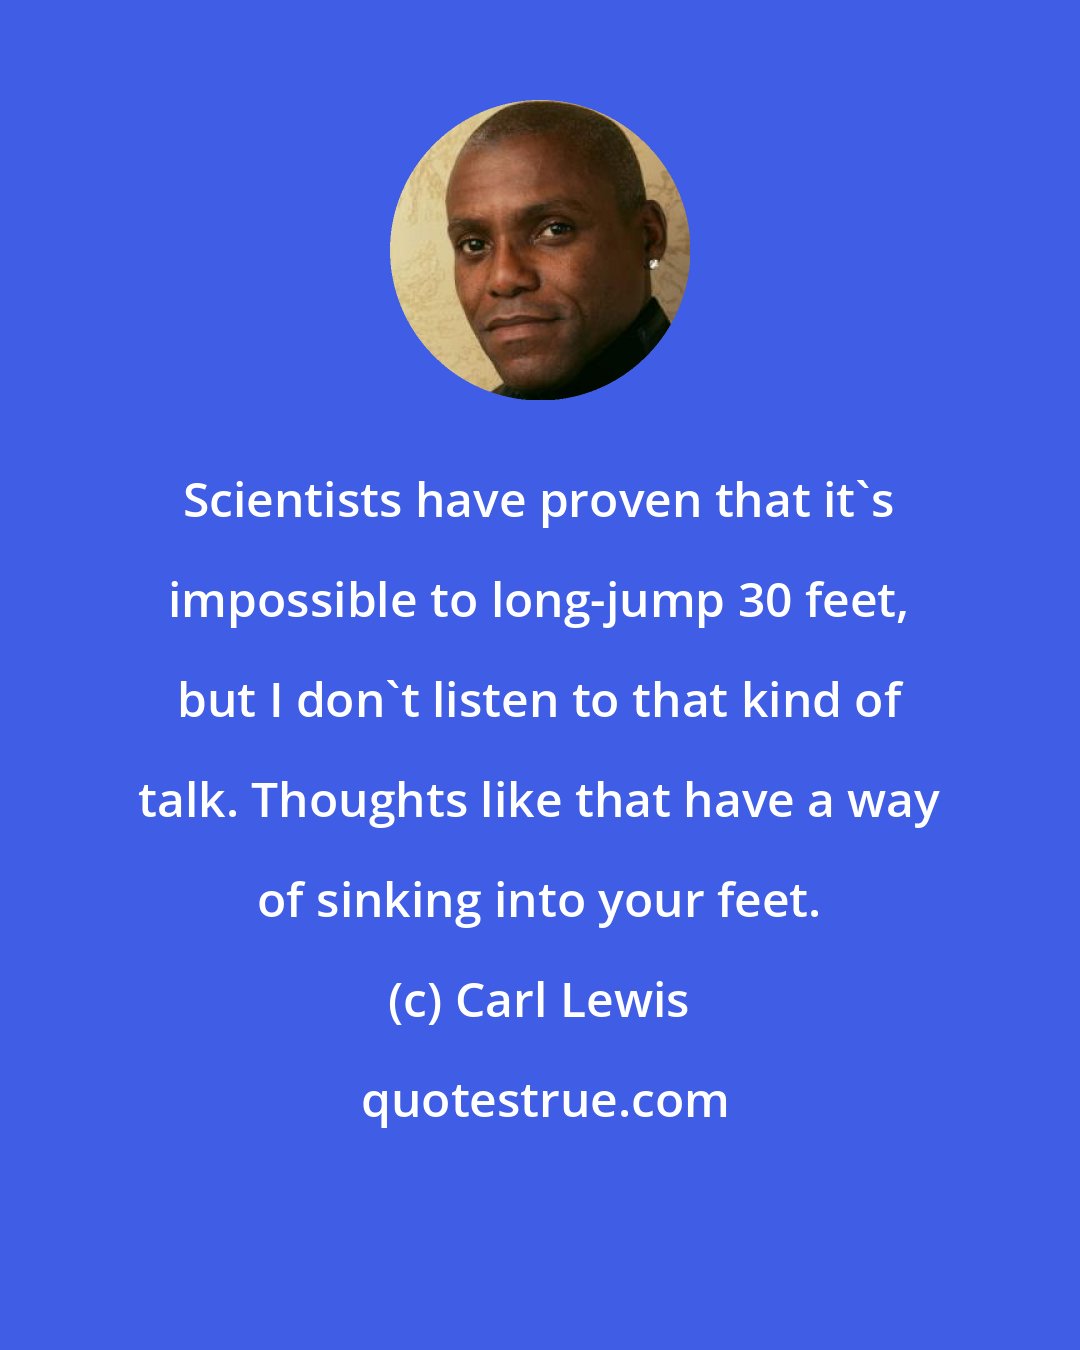 Carl Lewis: Scientists have proven that it's impossible to long-jump 30 feet, but I don't listen to that kind of talk. Thoughts like that have a way of sinking into your feet.